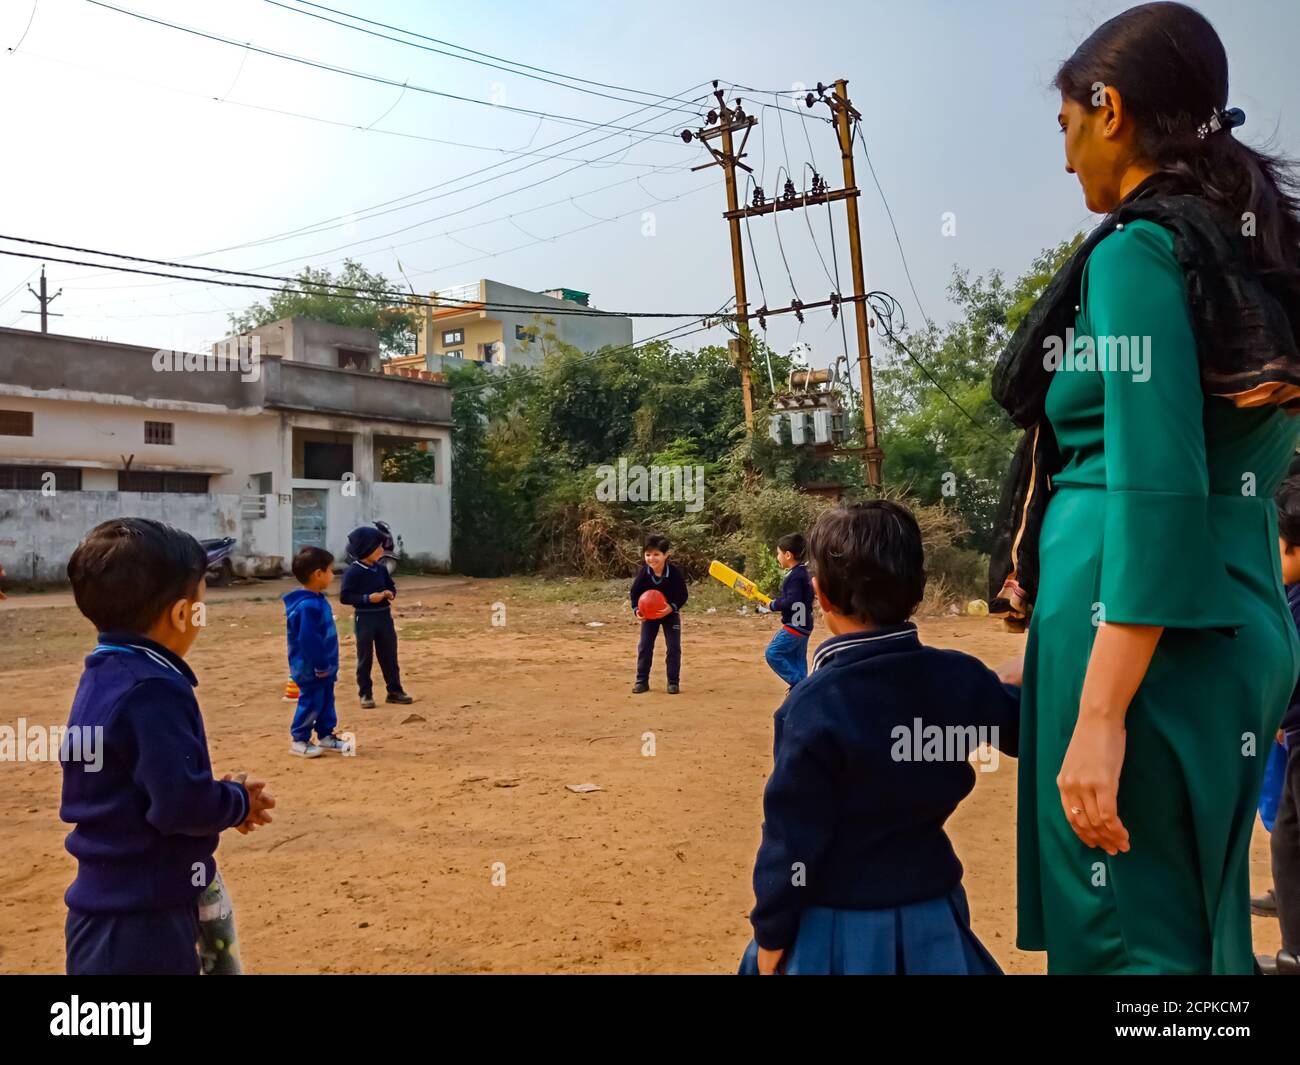 DISTRICT KATNI, INDIA - JANUARY 17, 2020: Indian preschool kids playing game together with lady teacher at soil field on sport ground. Stock Photo